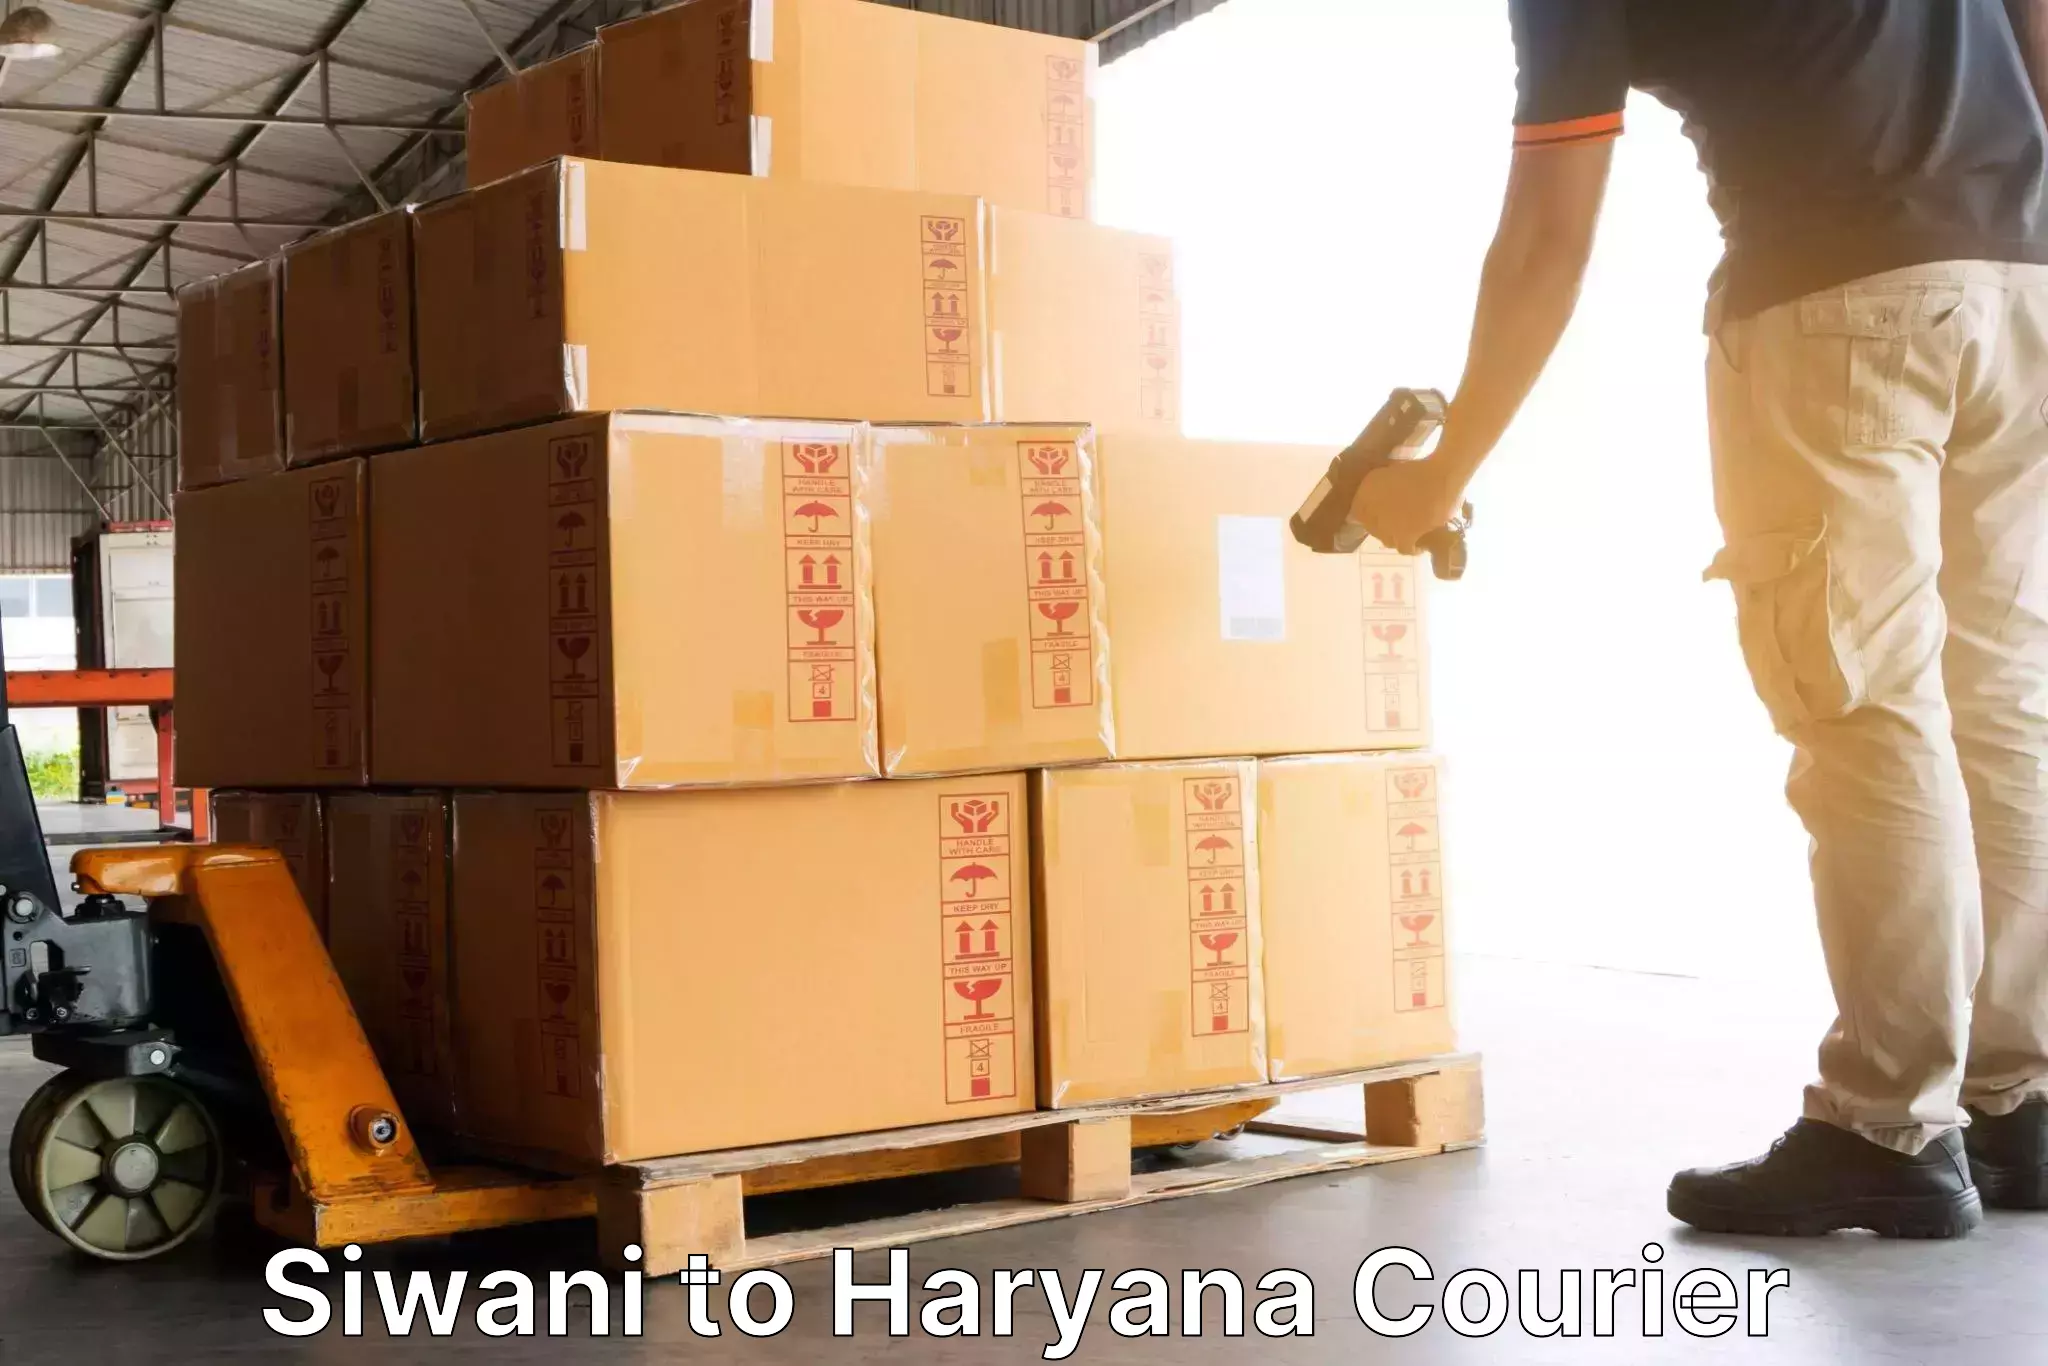 Weekend courier service Siwani to Faridabad